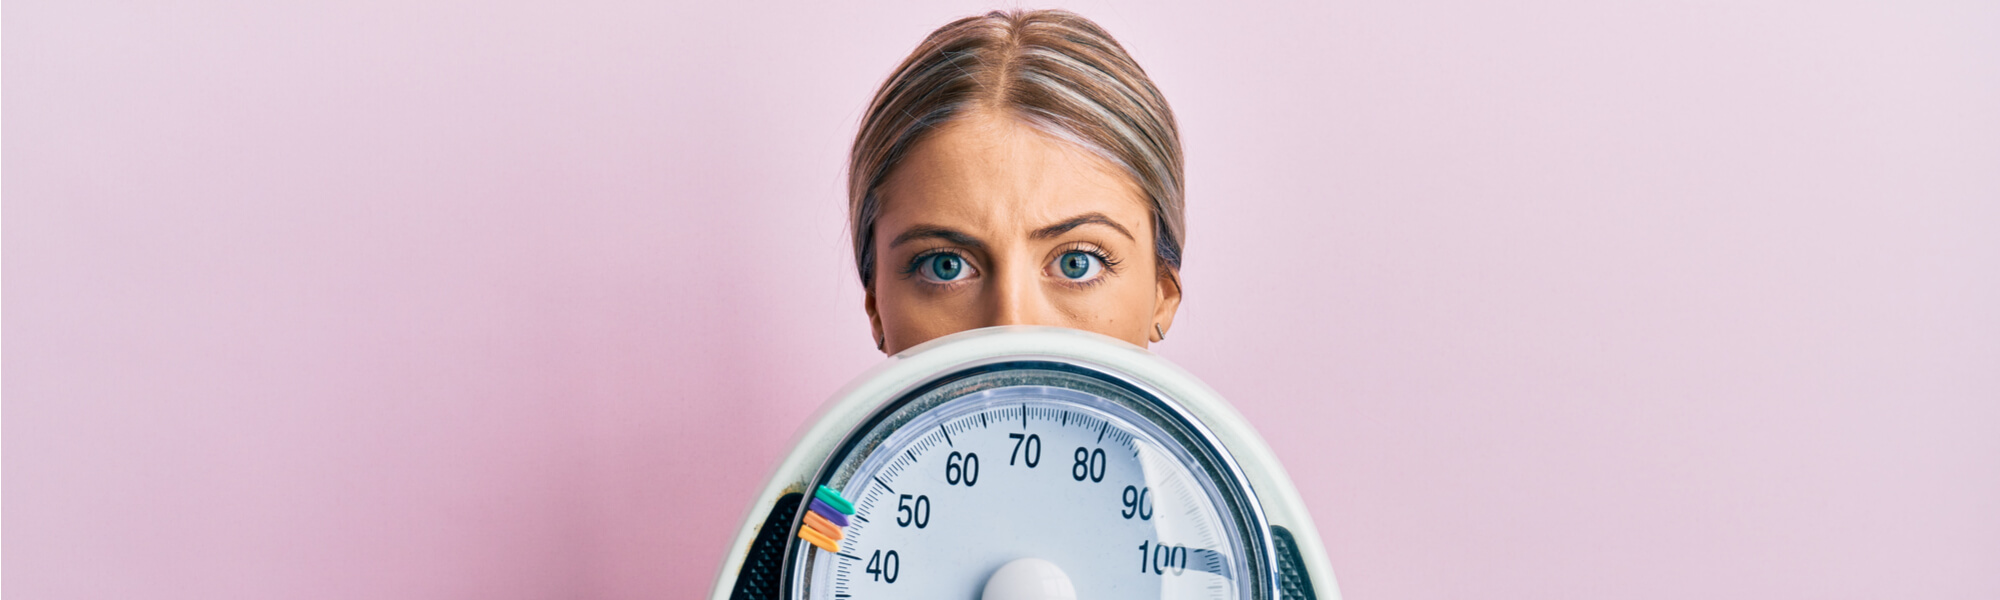 Why Am I Not Losing Weight On a Calorie Deficit? 12 Common Culprits